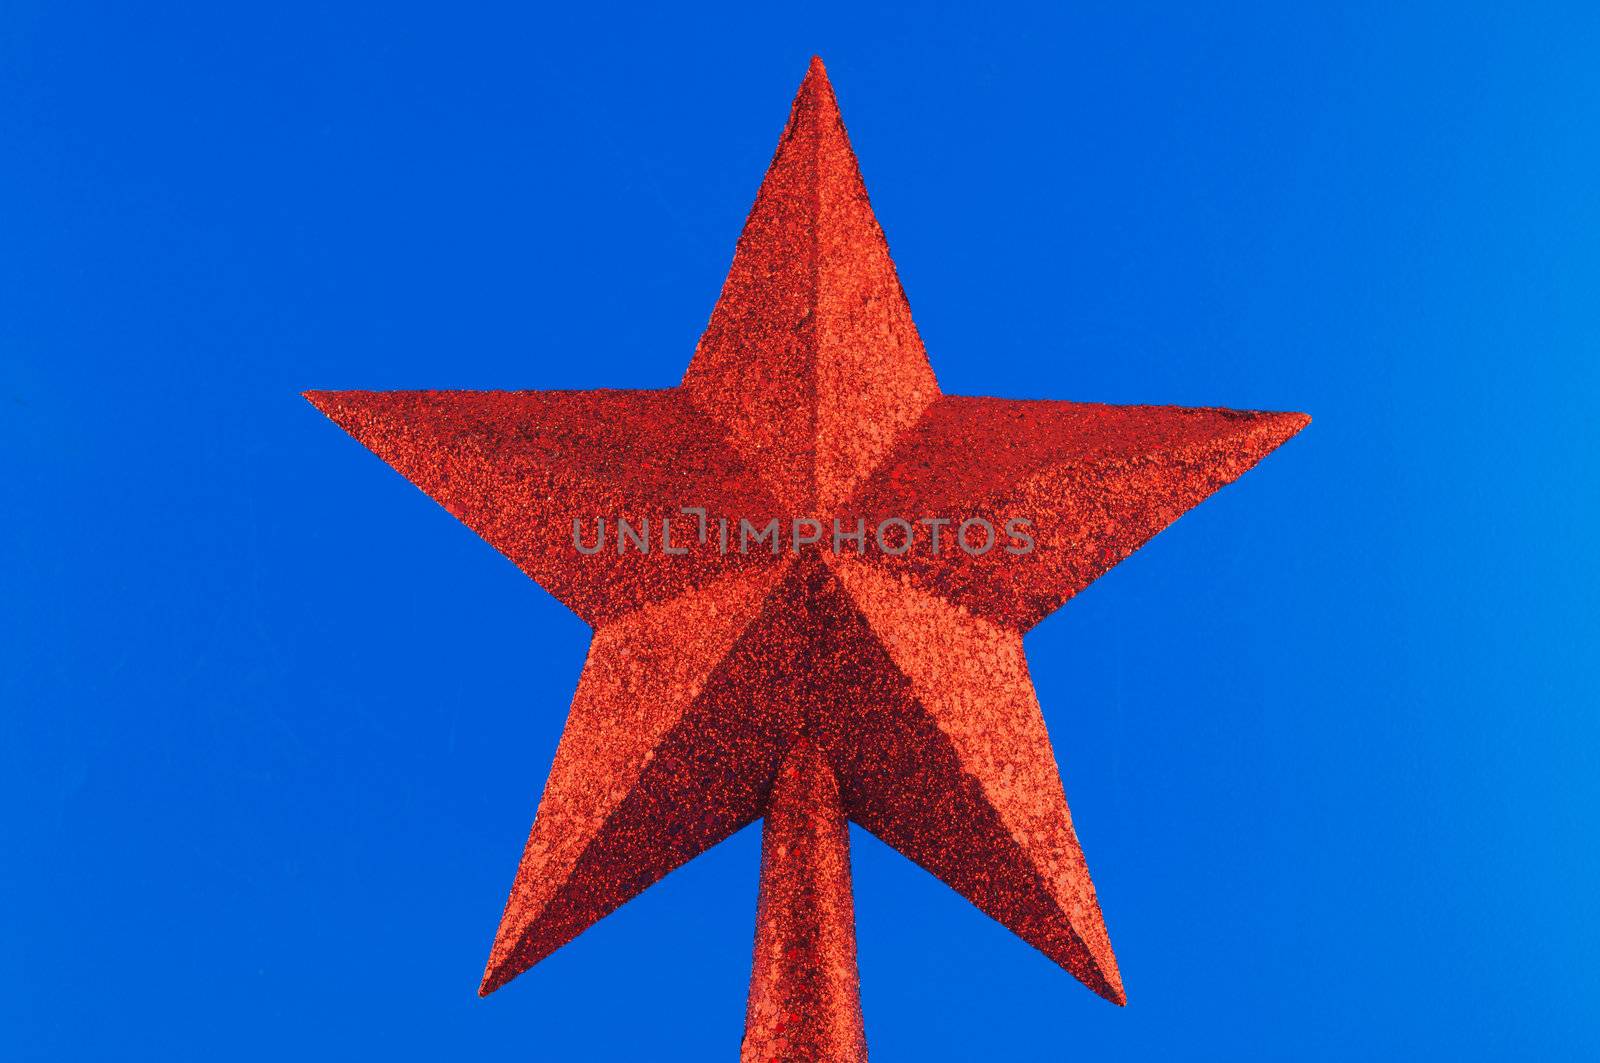  Red five-pointed star toy Christmas tree against a white background 